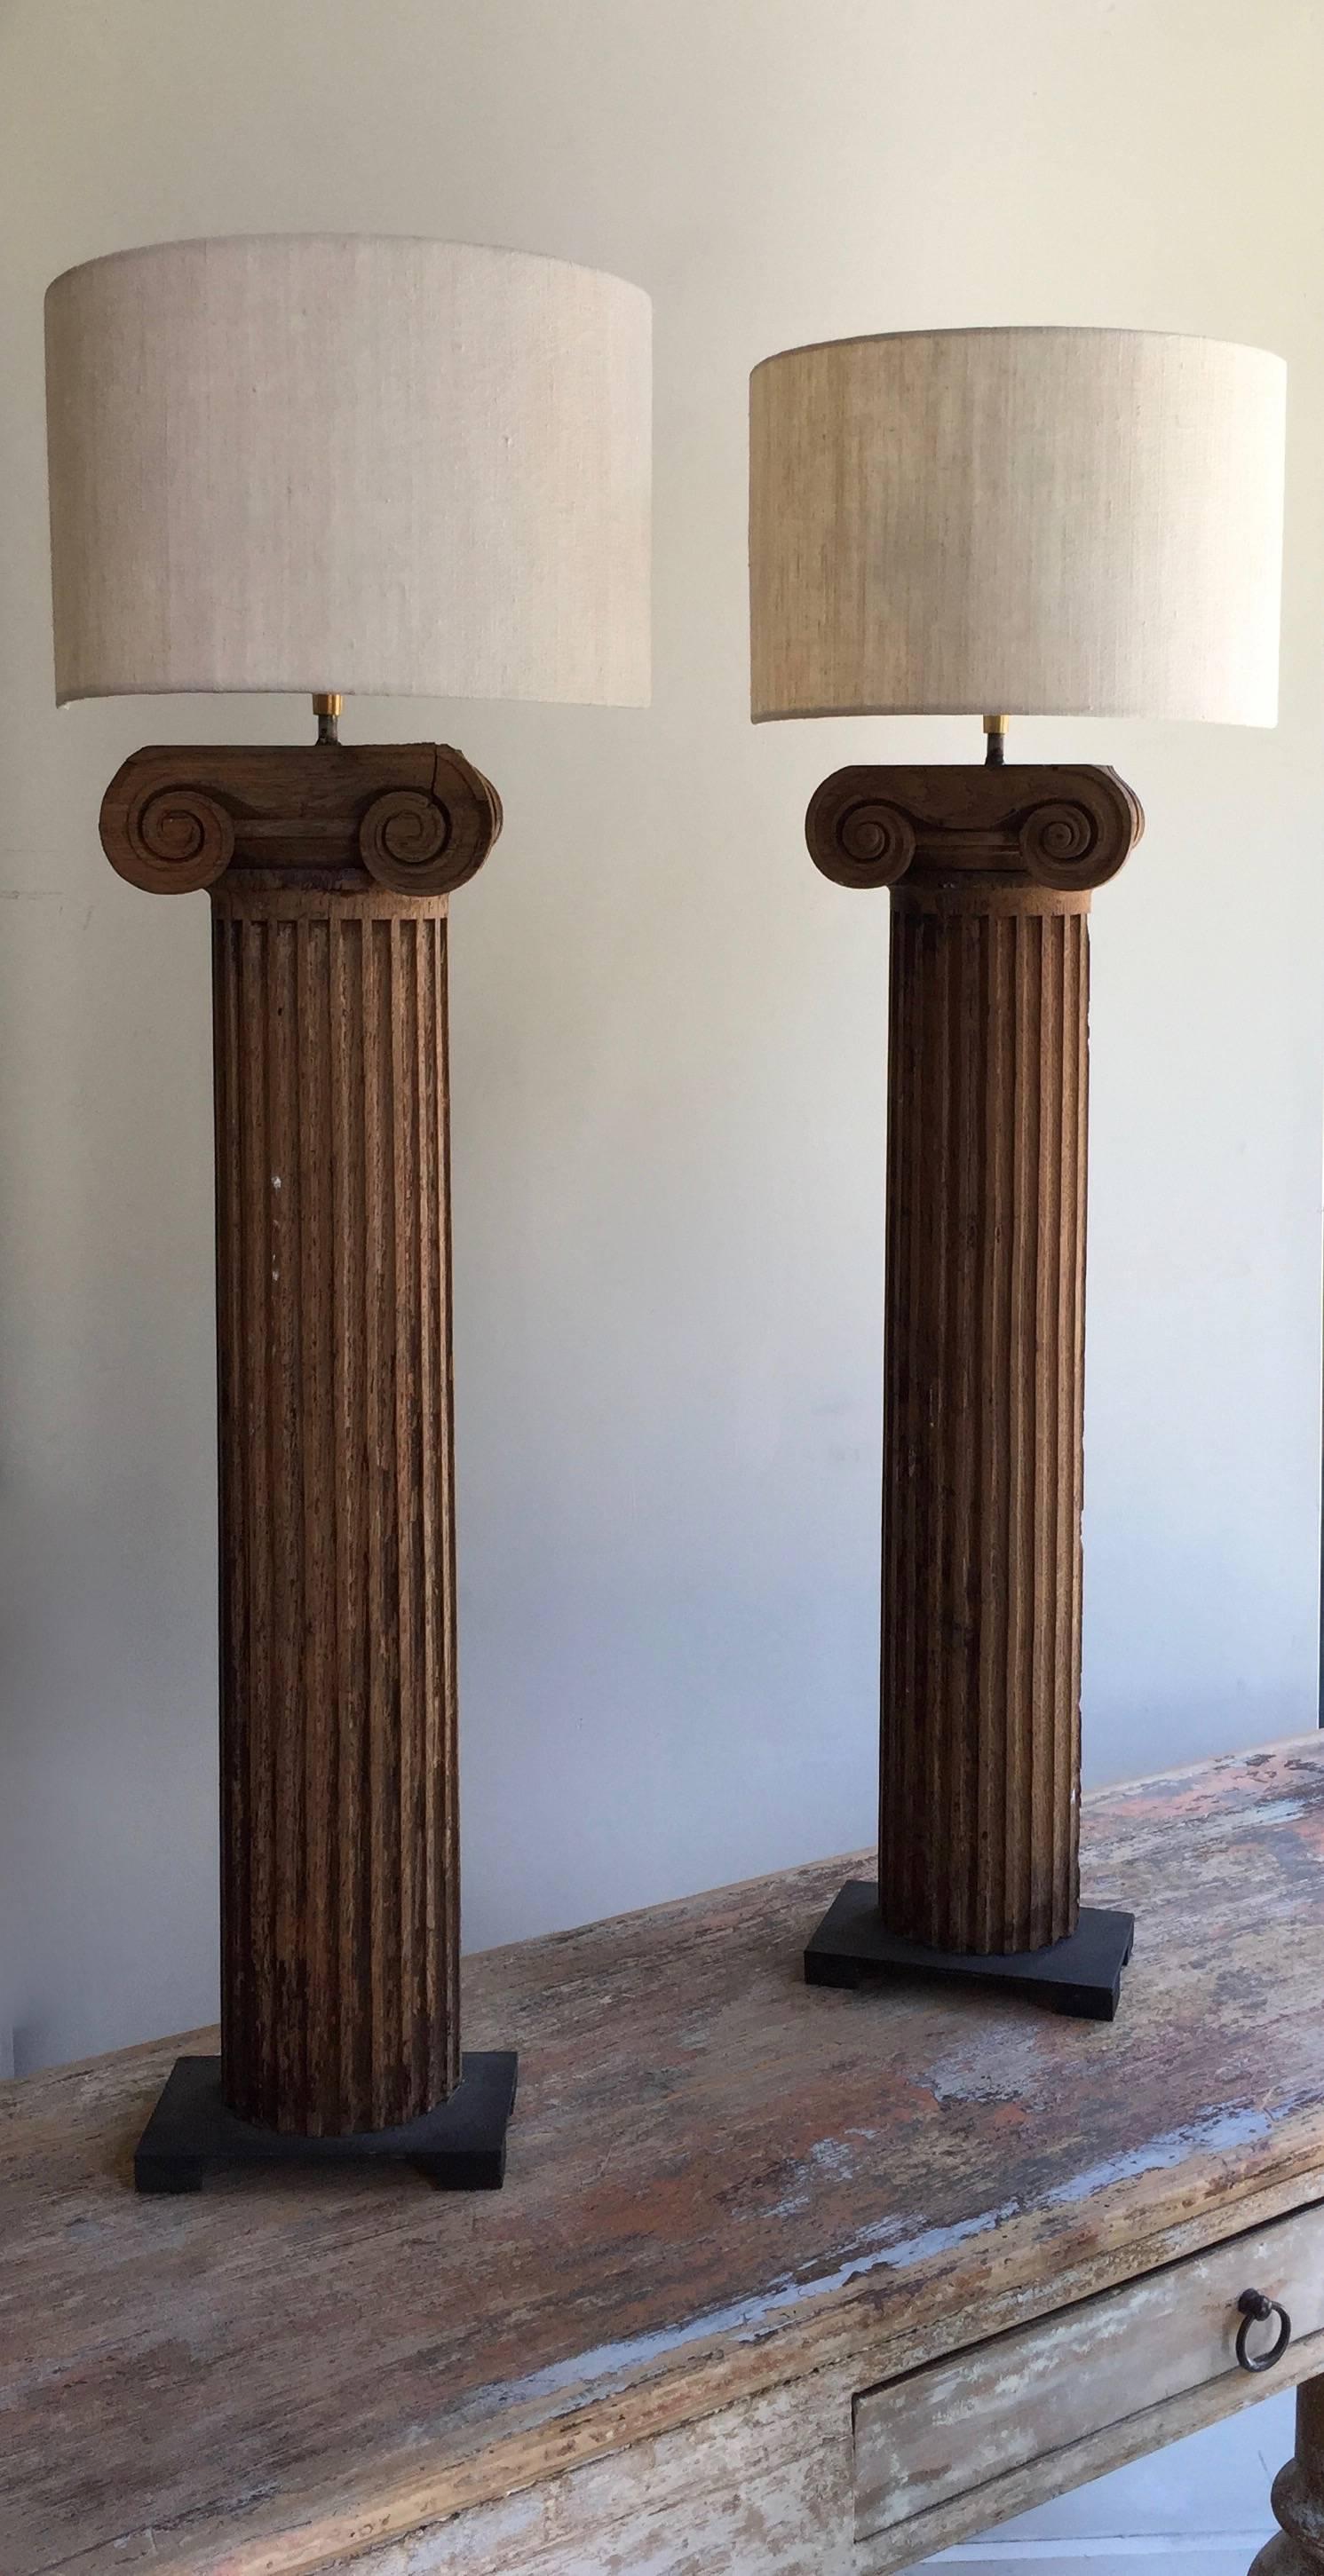 A pair of 19th century richly carved architectural half column fragments made into the table lamps, mounted on iron base and with custom-made half round linen shades from Paris, France.
Measures: Base: 4